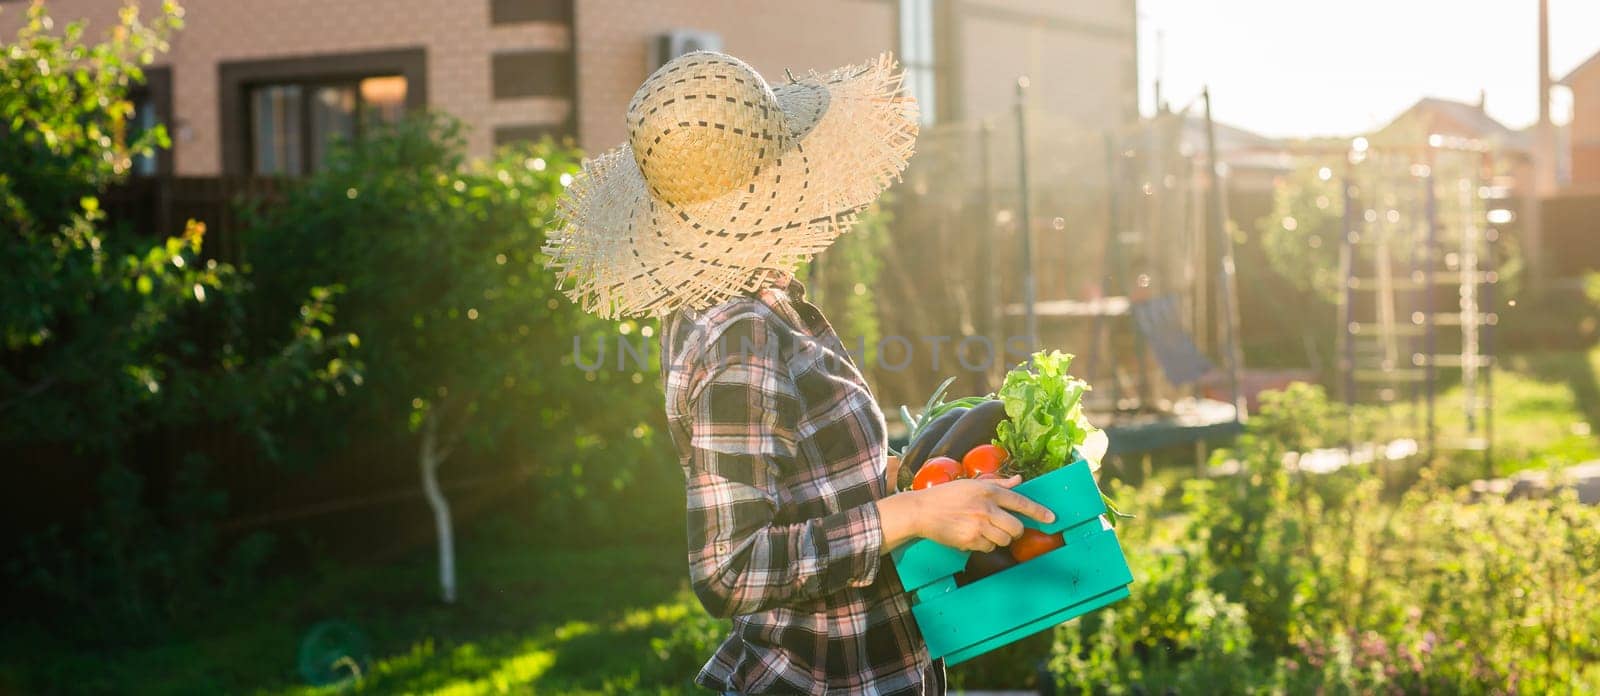 Hardworking young woman gardener in straw hat picks up her harvest box of tomatoes on sunny summer day.